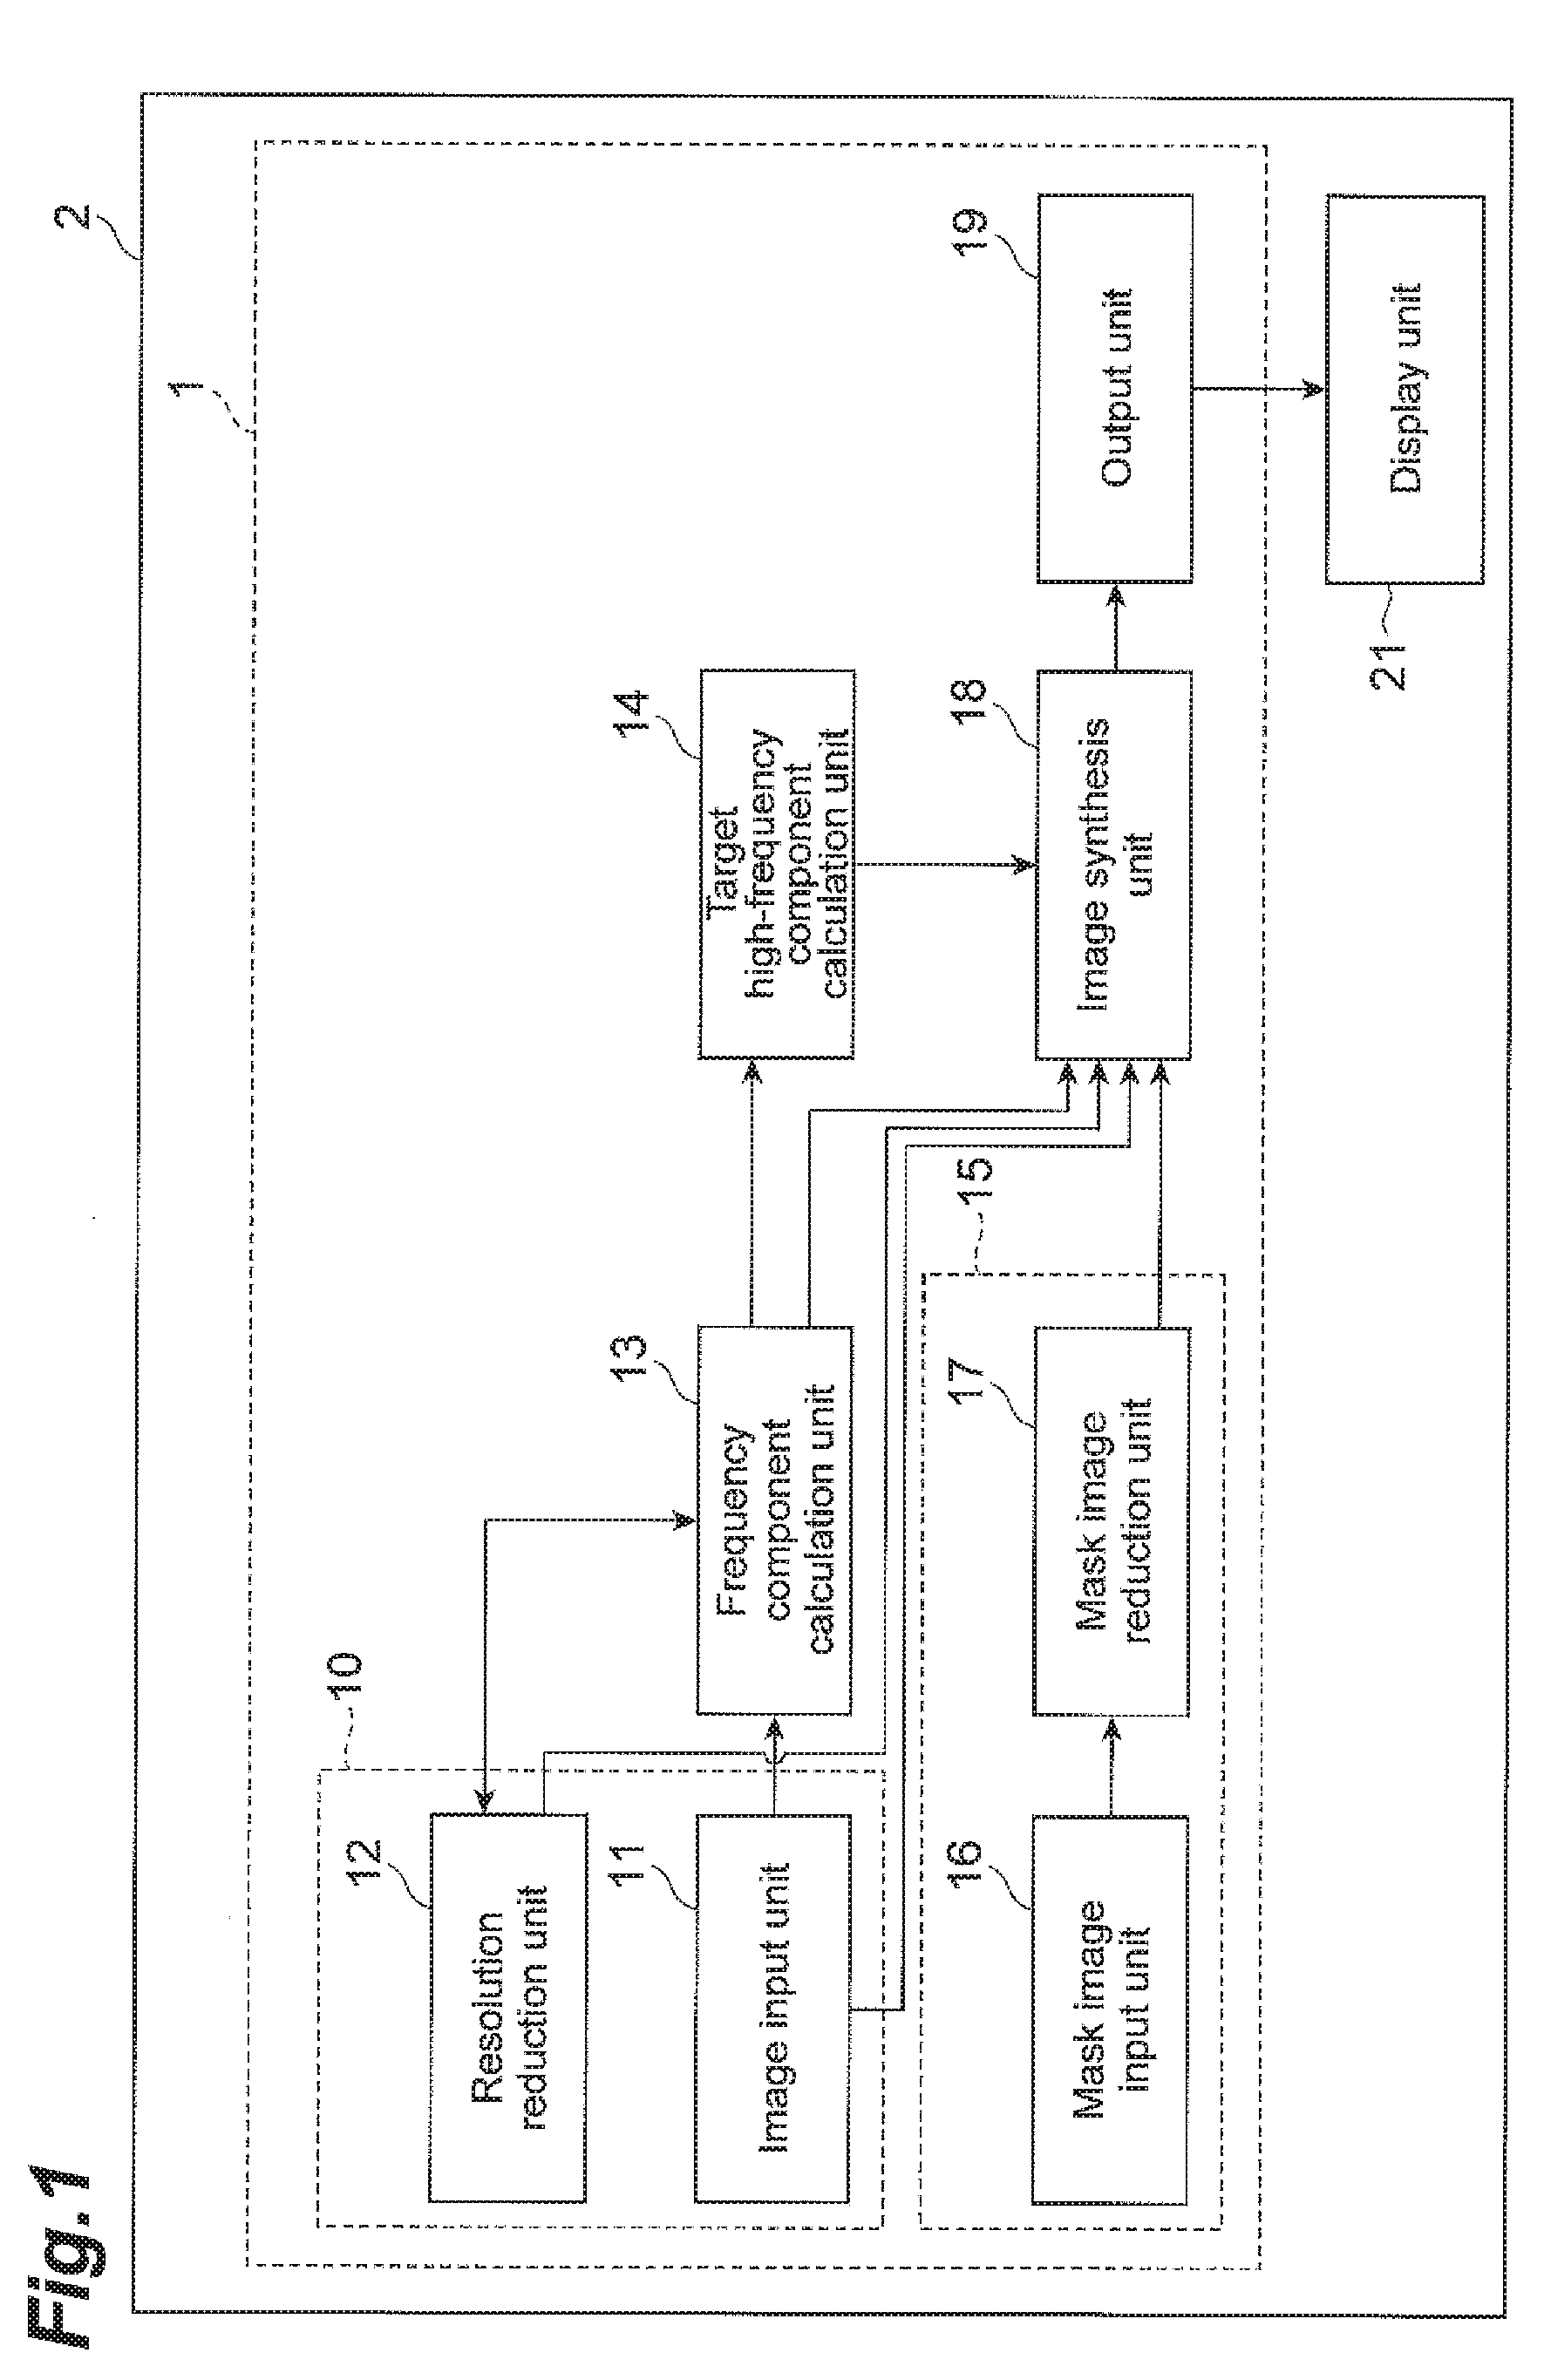 Image synthesis apparatus, image synthesis method, and recording medium